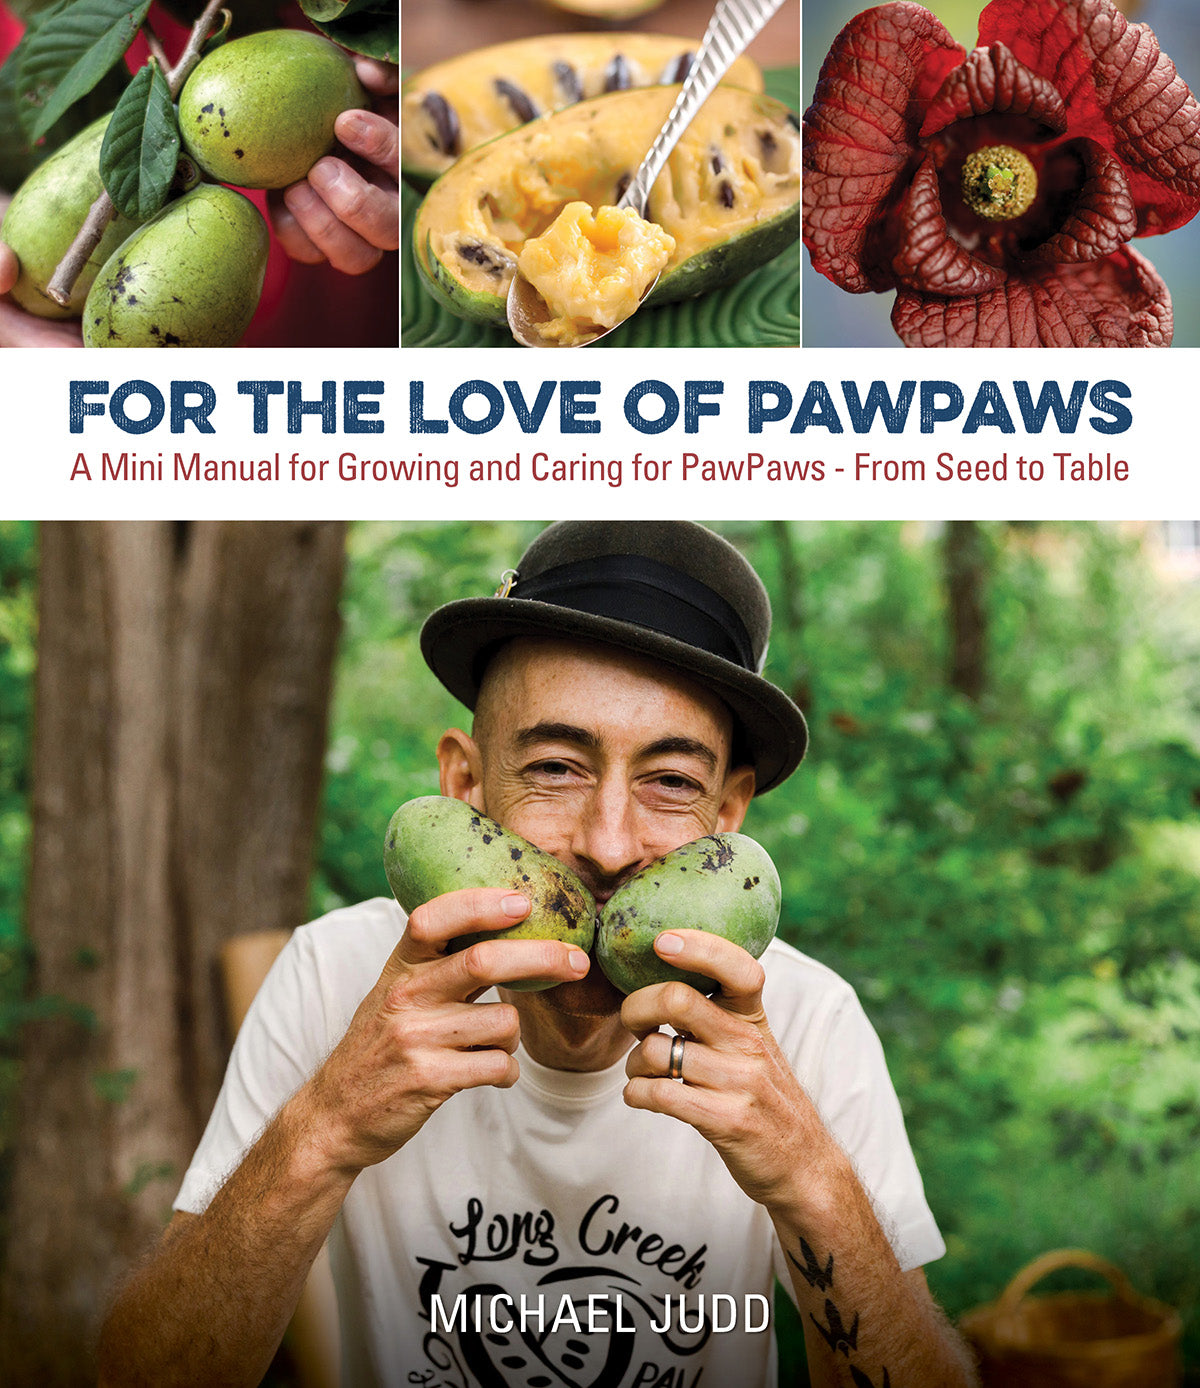 For the Love of Pawpaws